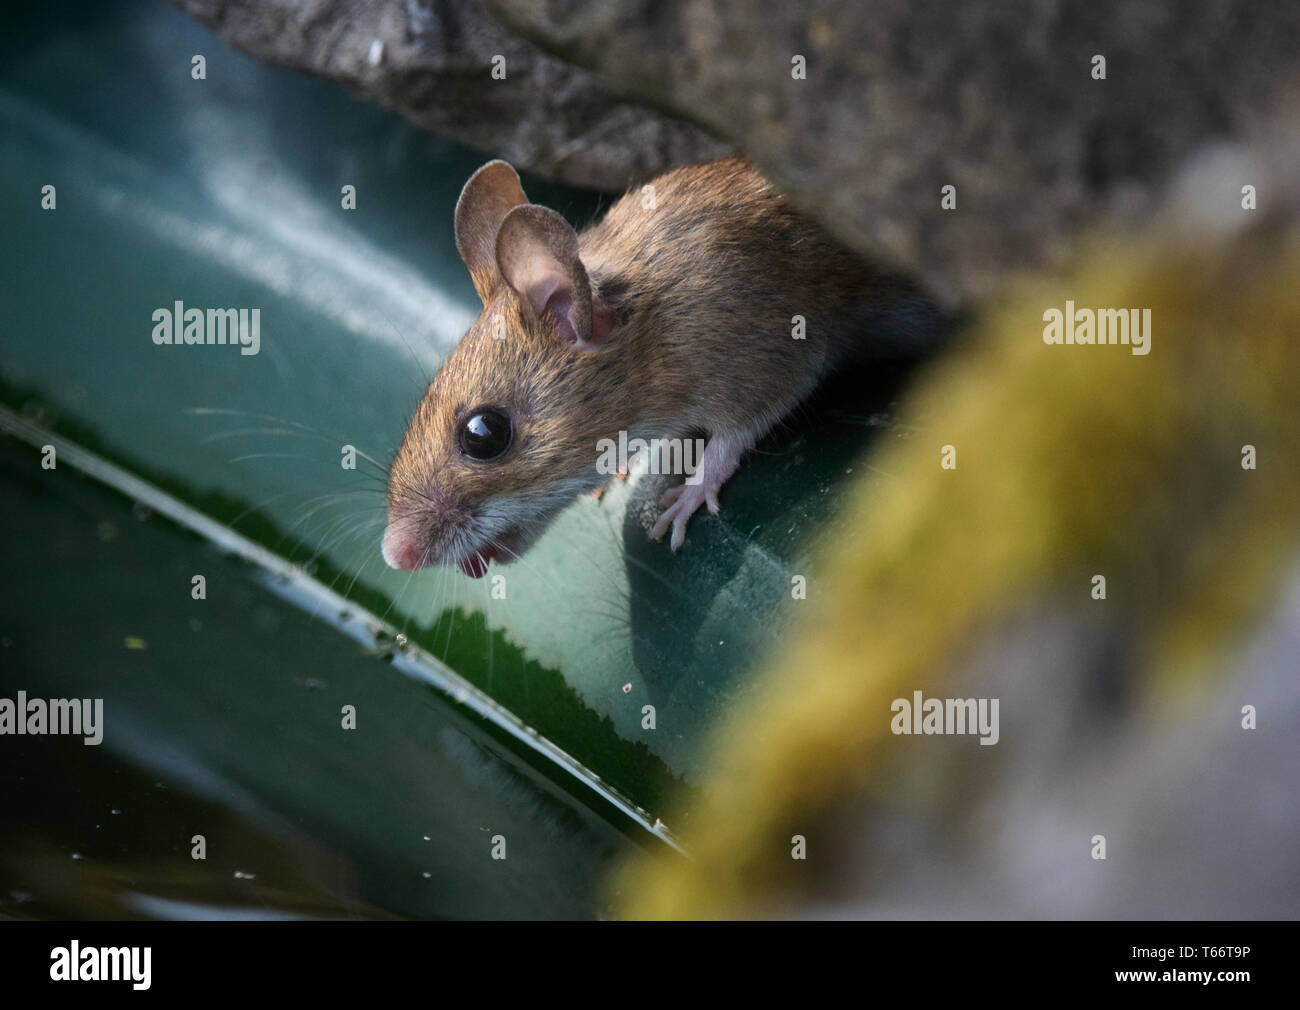 Wood Mouse, Apodemus sylvaticus, taking a drink in garden pond, Lancashire, UK Stock Photo